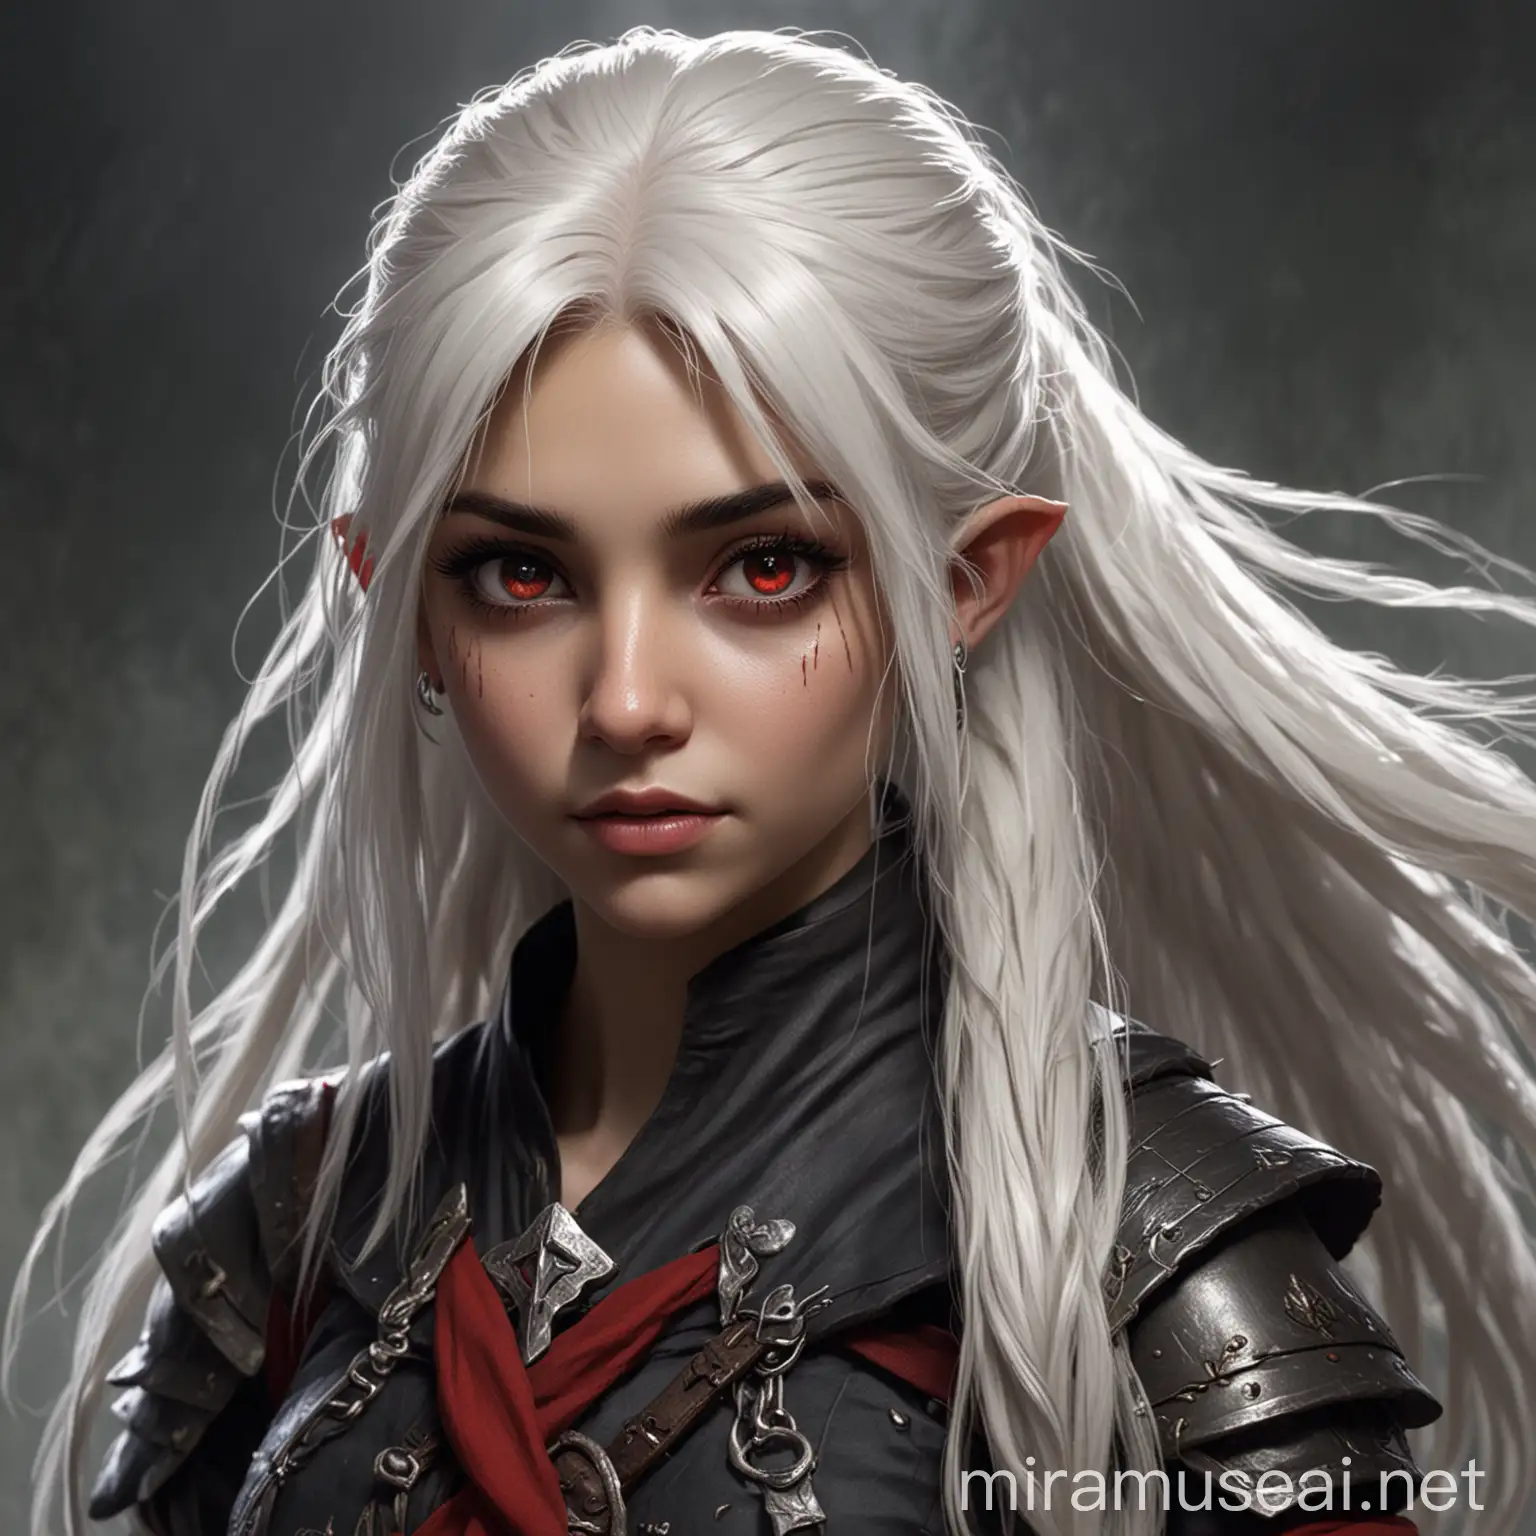 Dark Fantasy, Dungeons and Dragons, Halfling, olive skin, red eyes, long white hair with pony tail